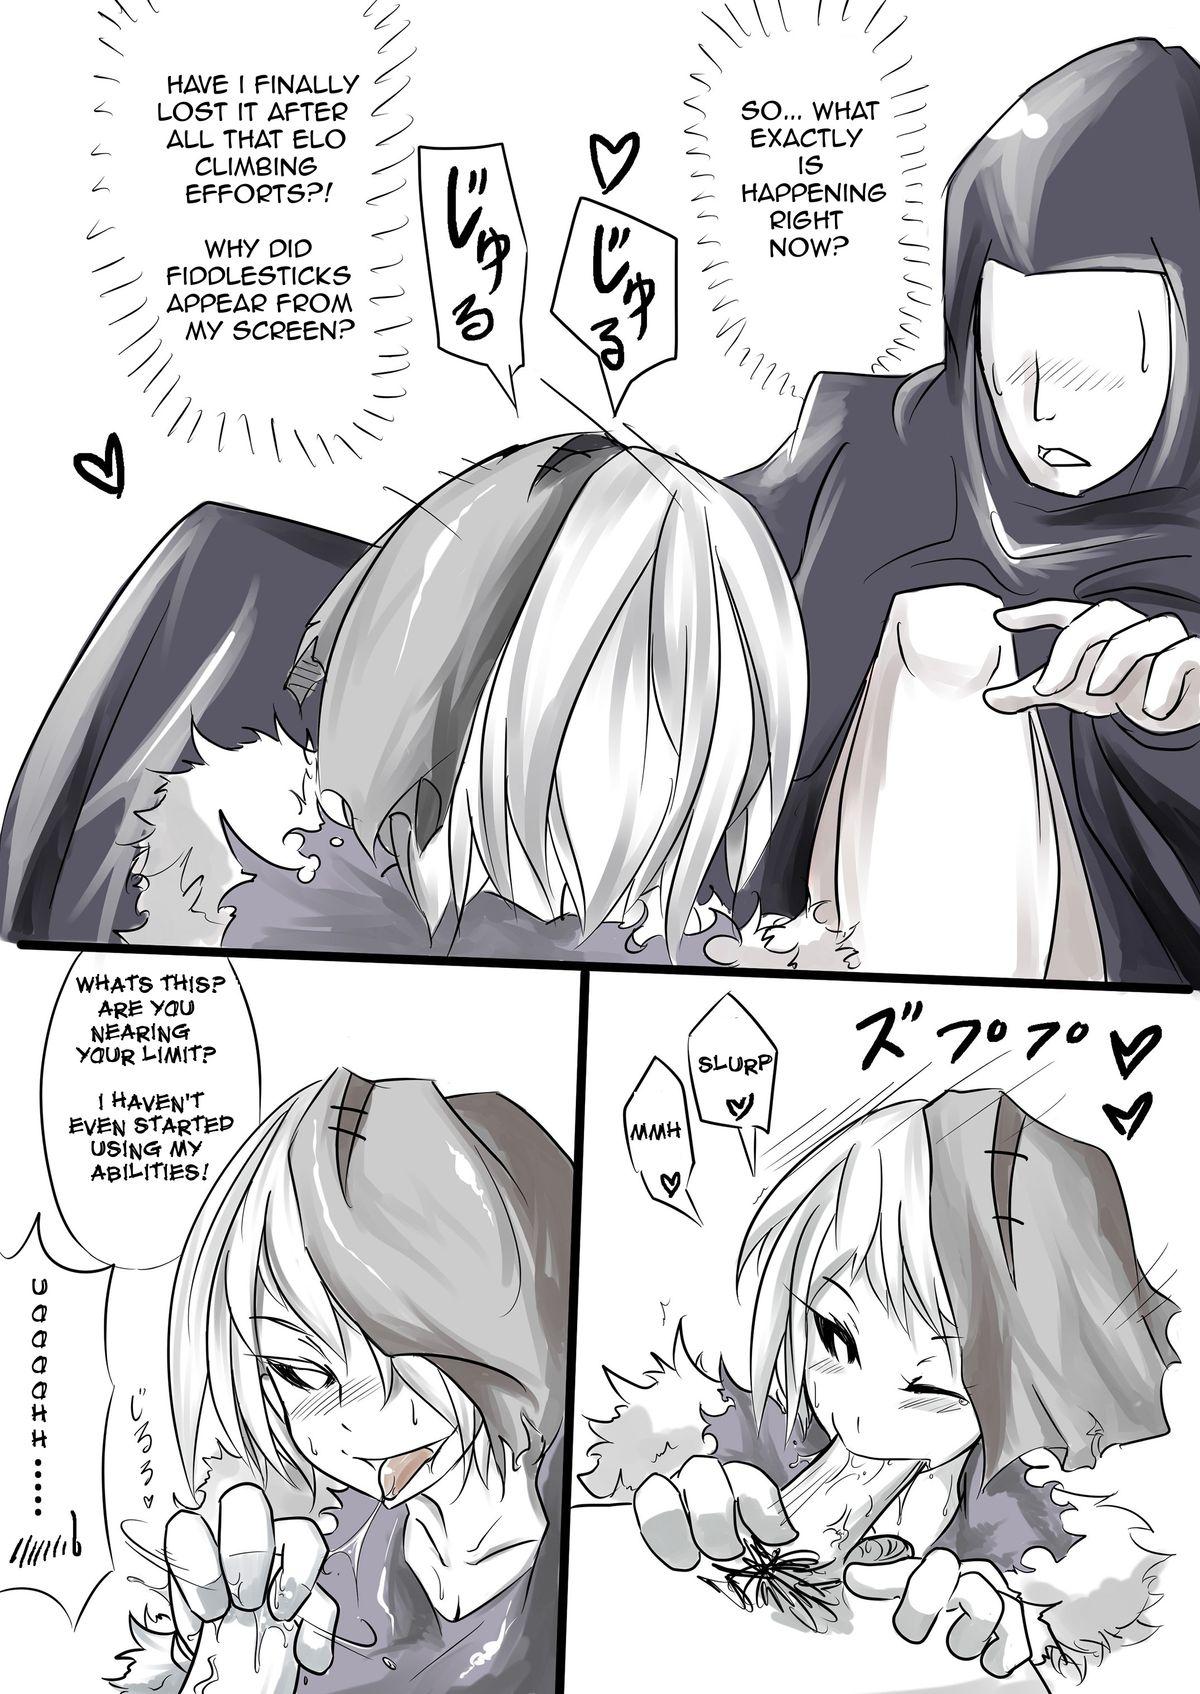 Free Amateur I FEEL YOUR FEAR - League of legends Asia - Page 7